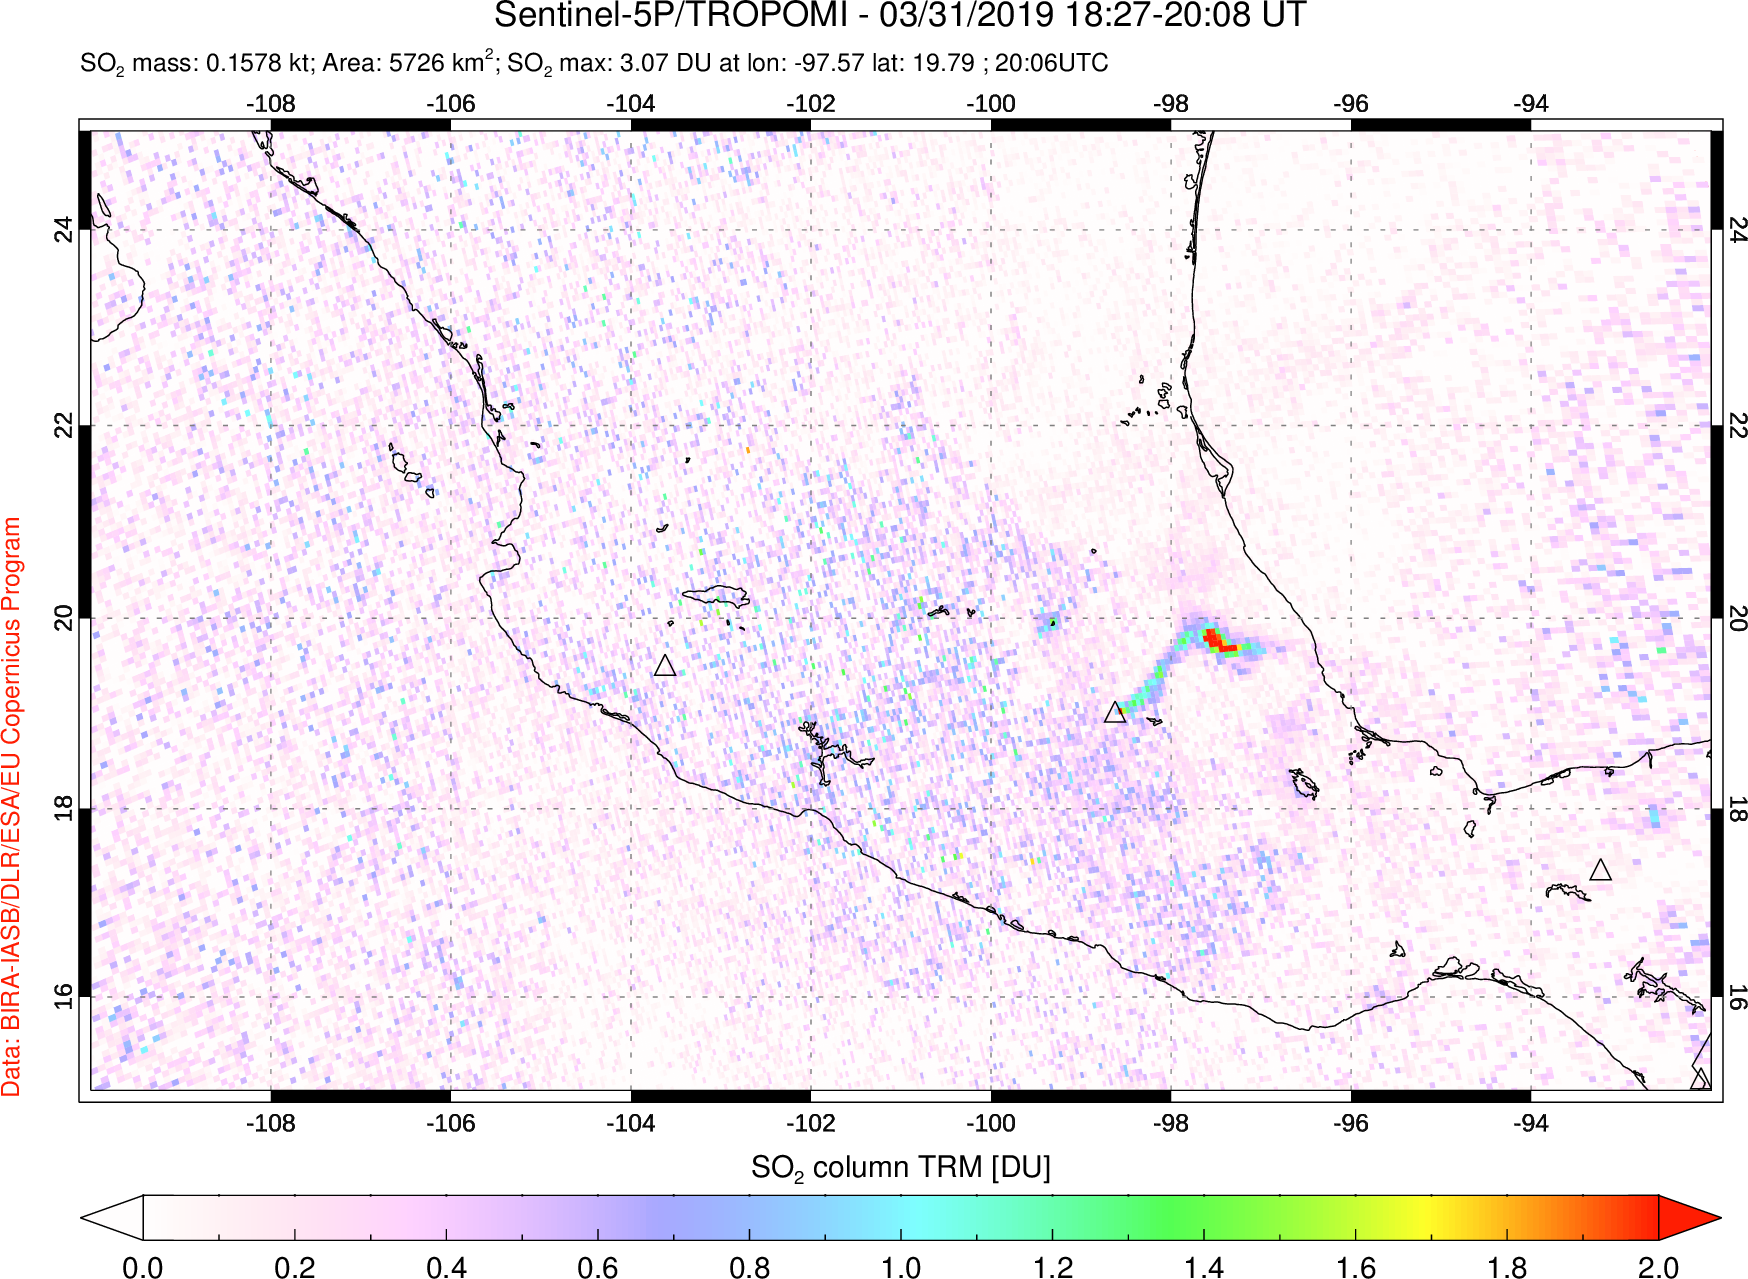 A sulfur dioxide image over Mexico on Mar 31, 2019.